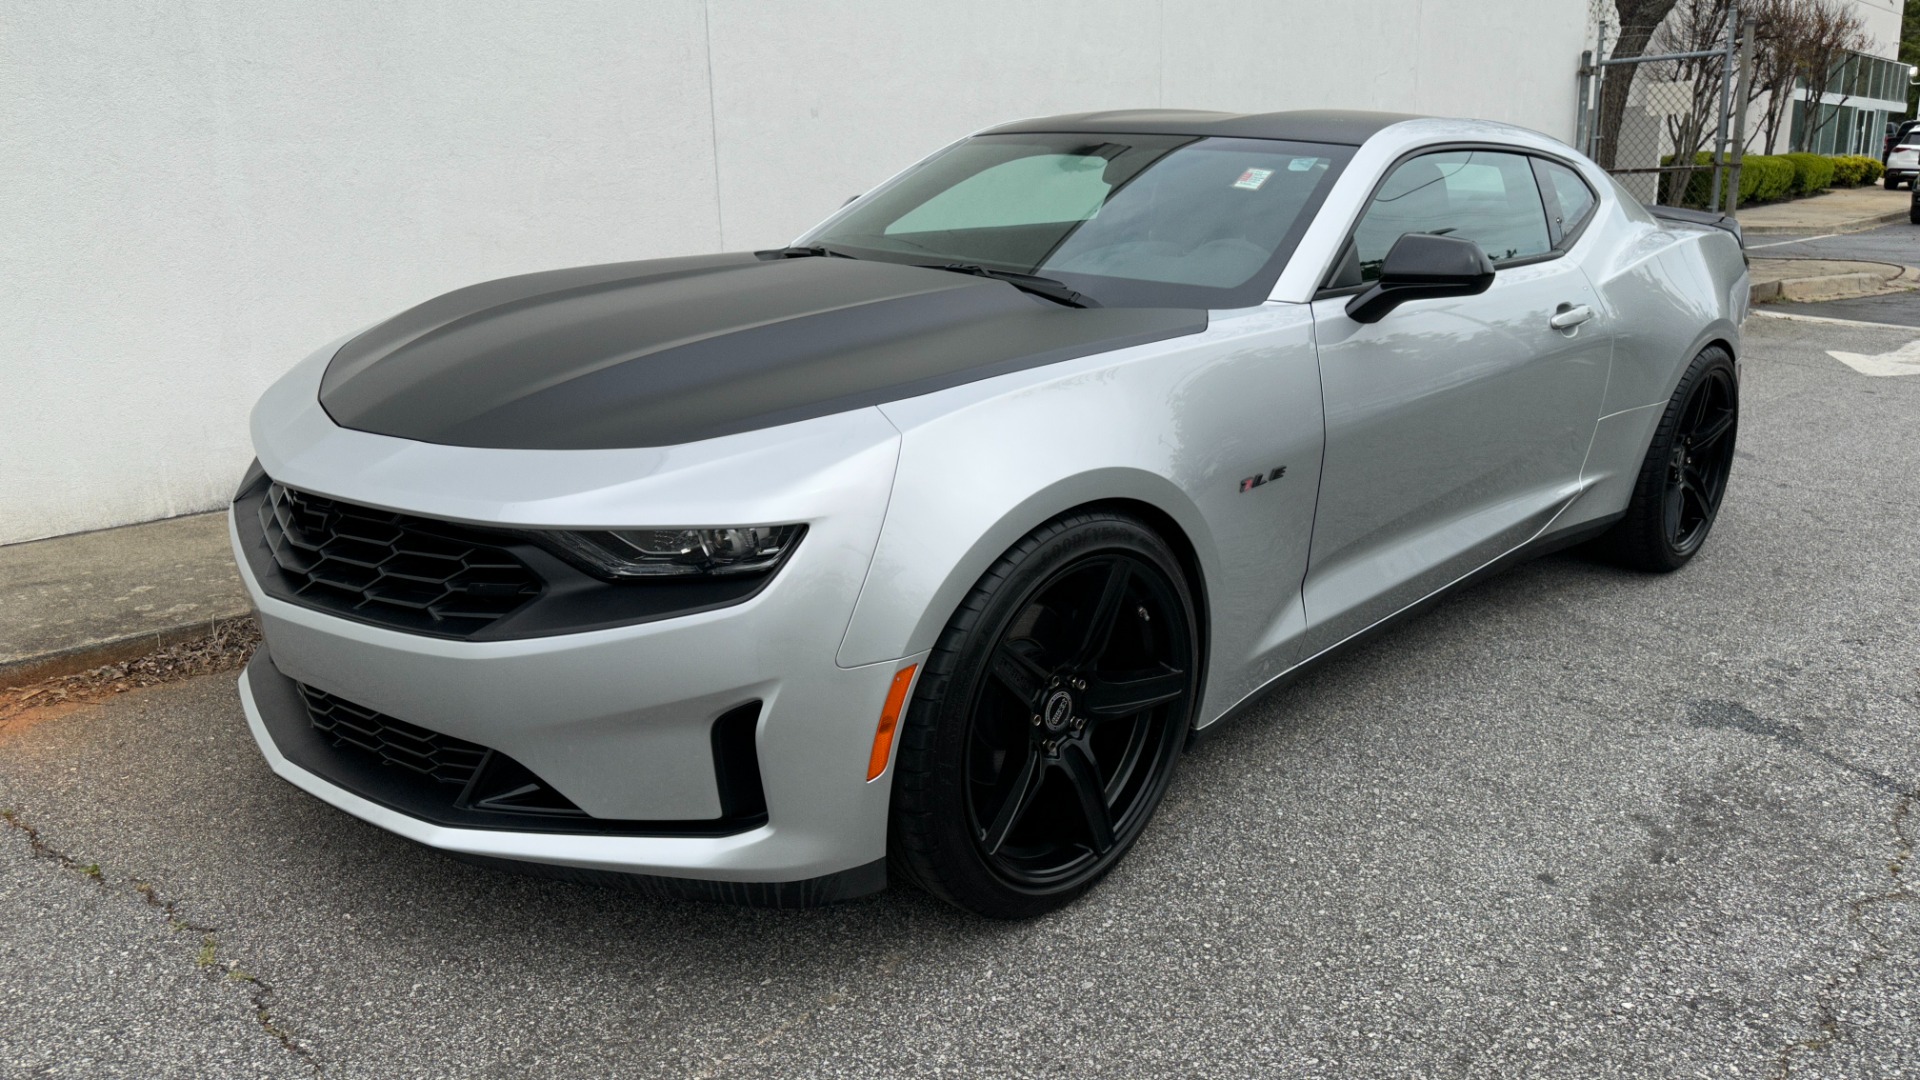 Used 2019 Chevrolet Camaro 2LT / 6SPD MANUAL / RECARO SEATS / UPGRADED WHEELS for sale $29,900 at Formula Imports in Charlotte NC 28227 2